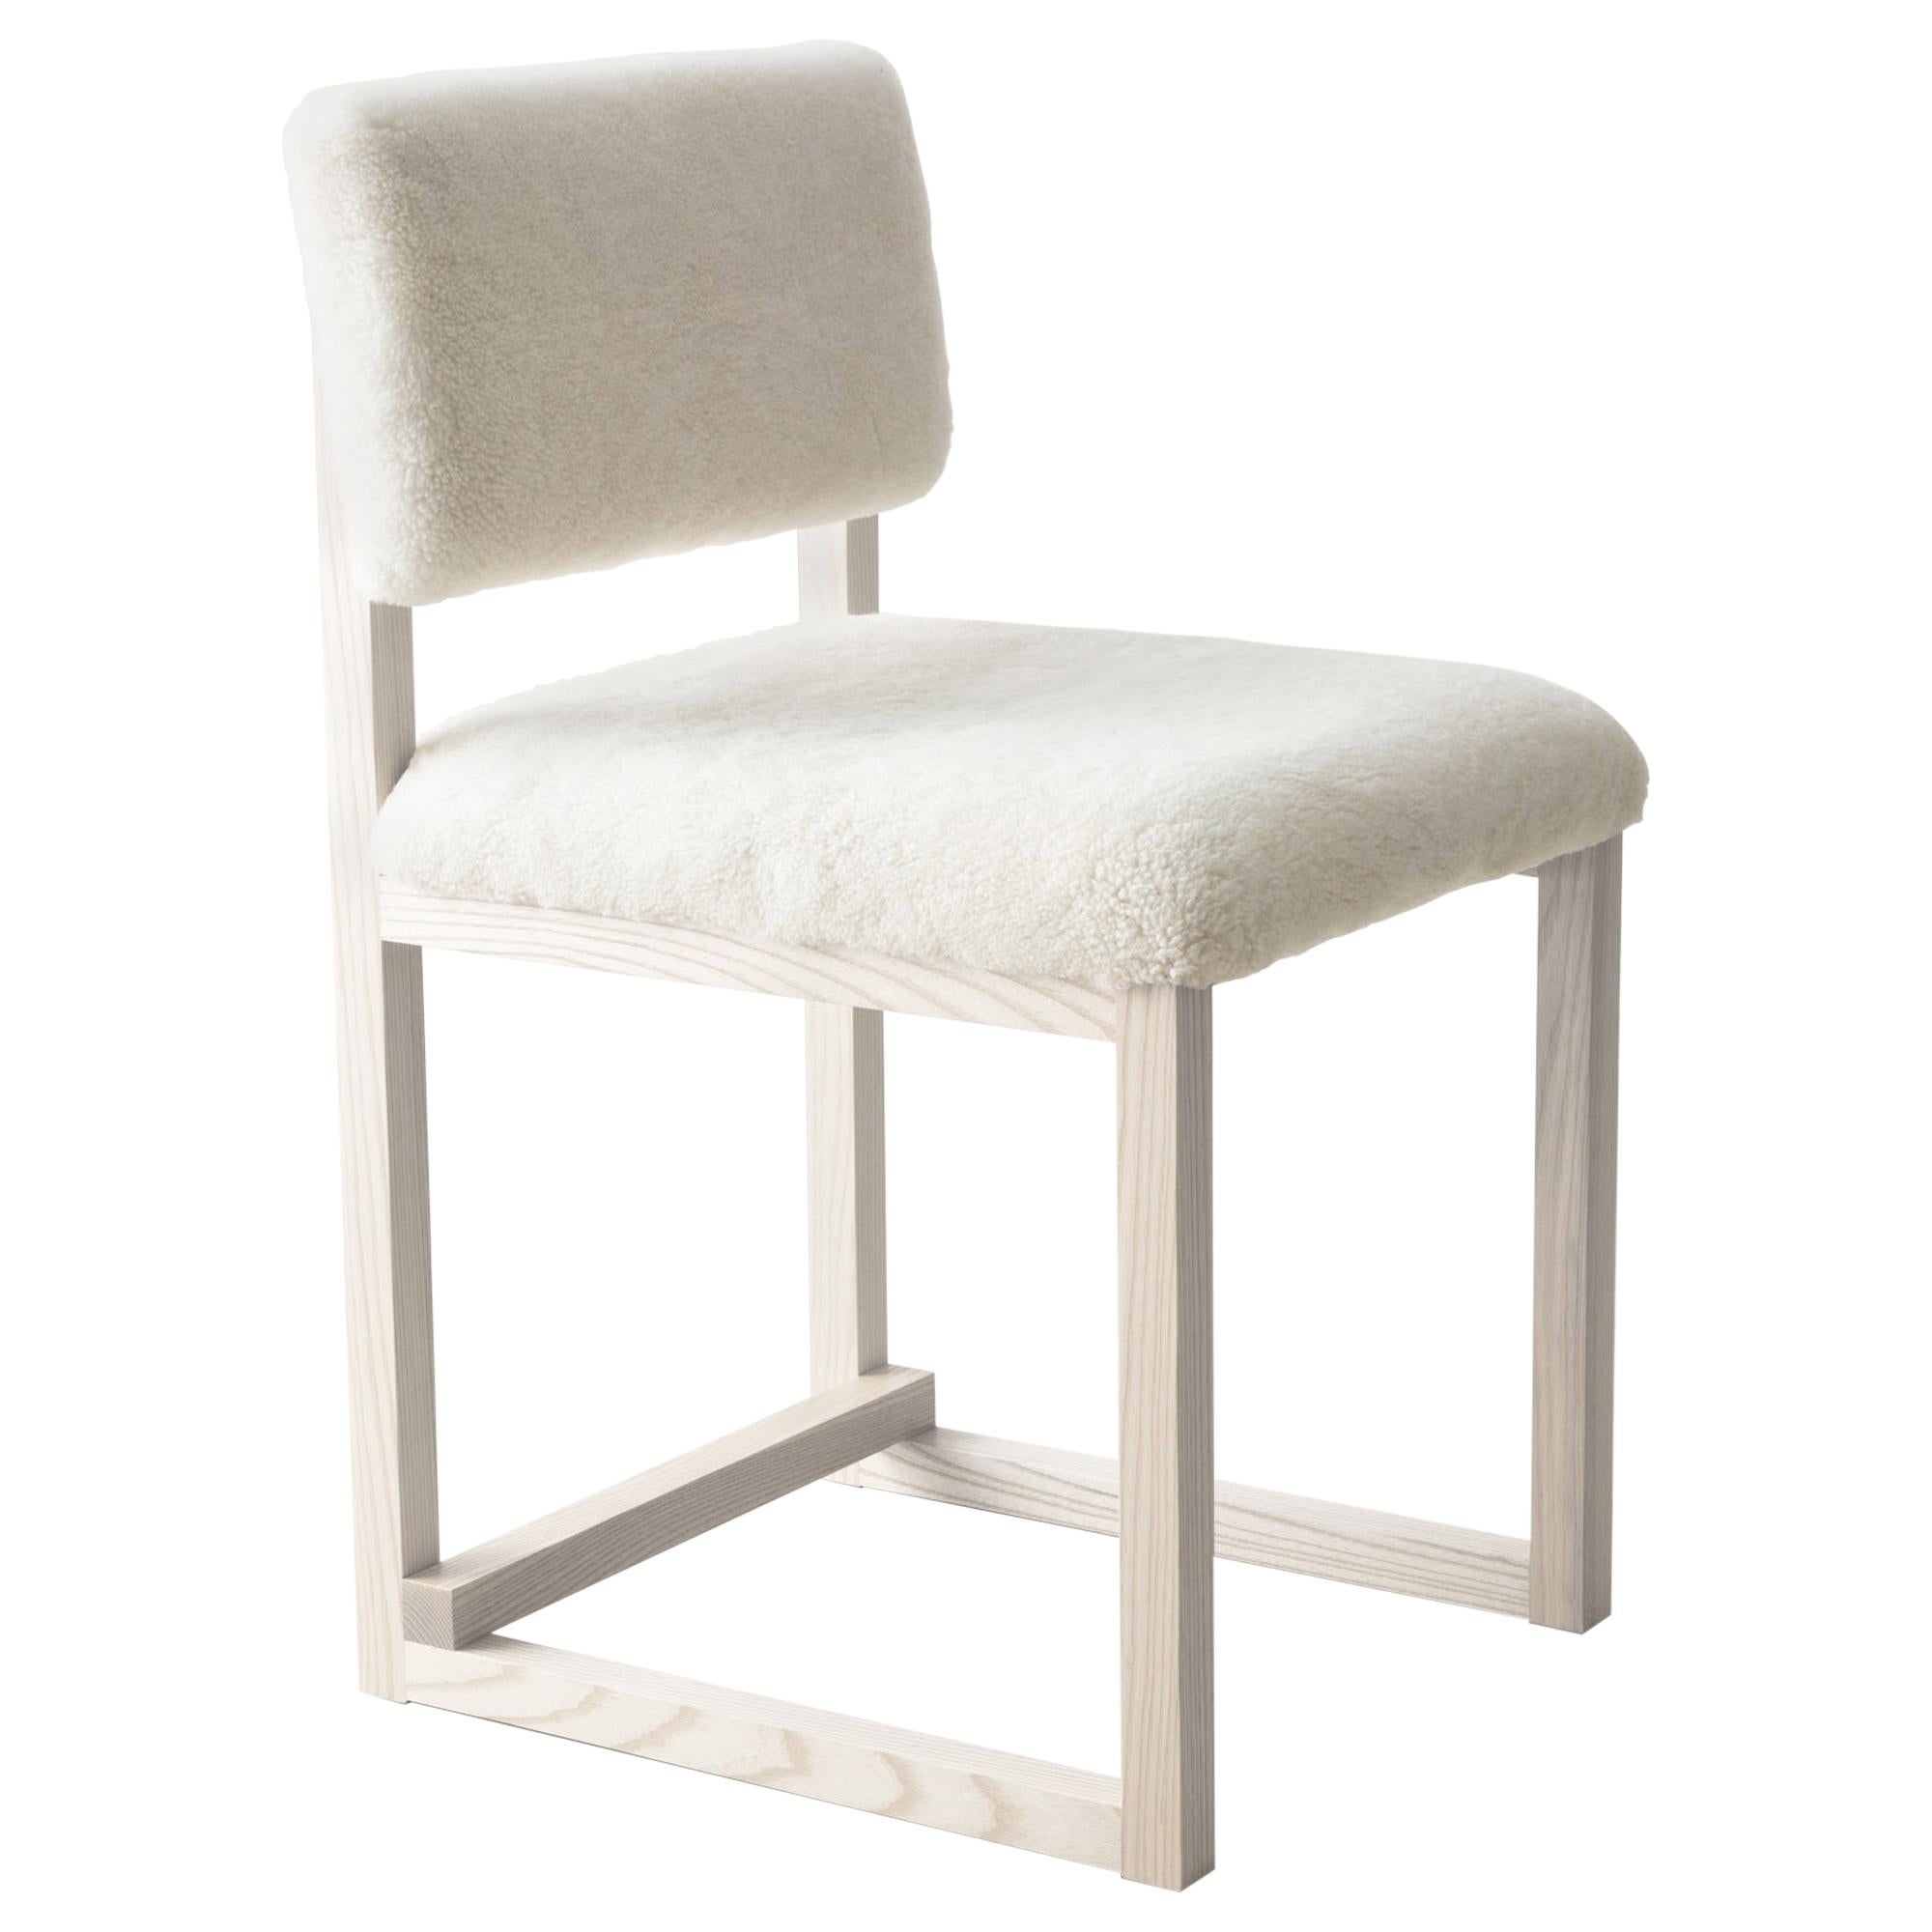 SQ Upholstered Dining Chair Special Edition, Shearling or COM, Solid Ash, Brass For Sale